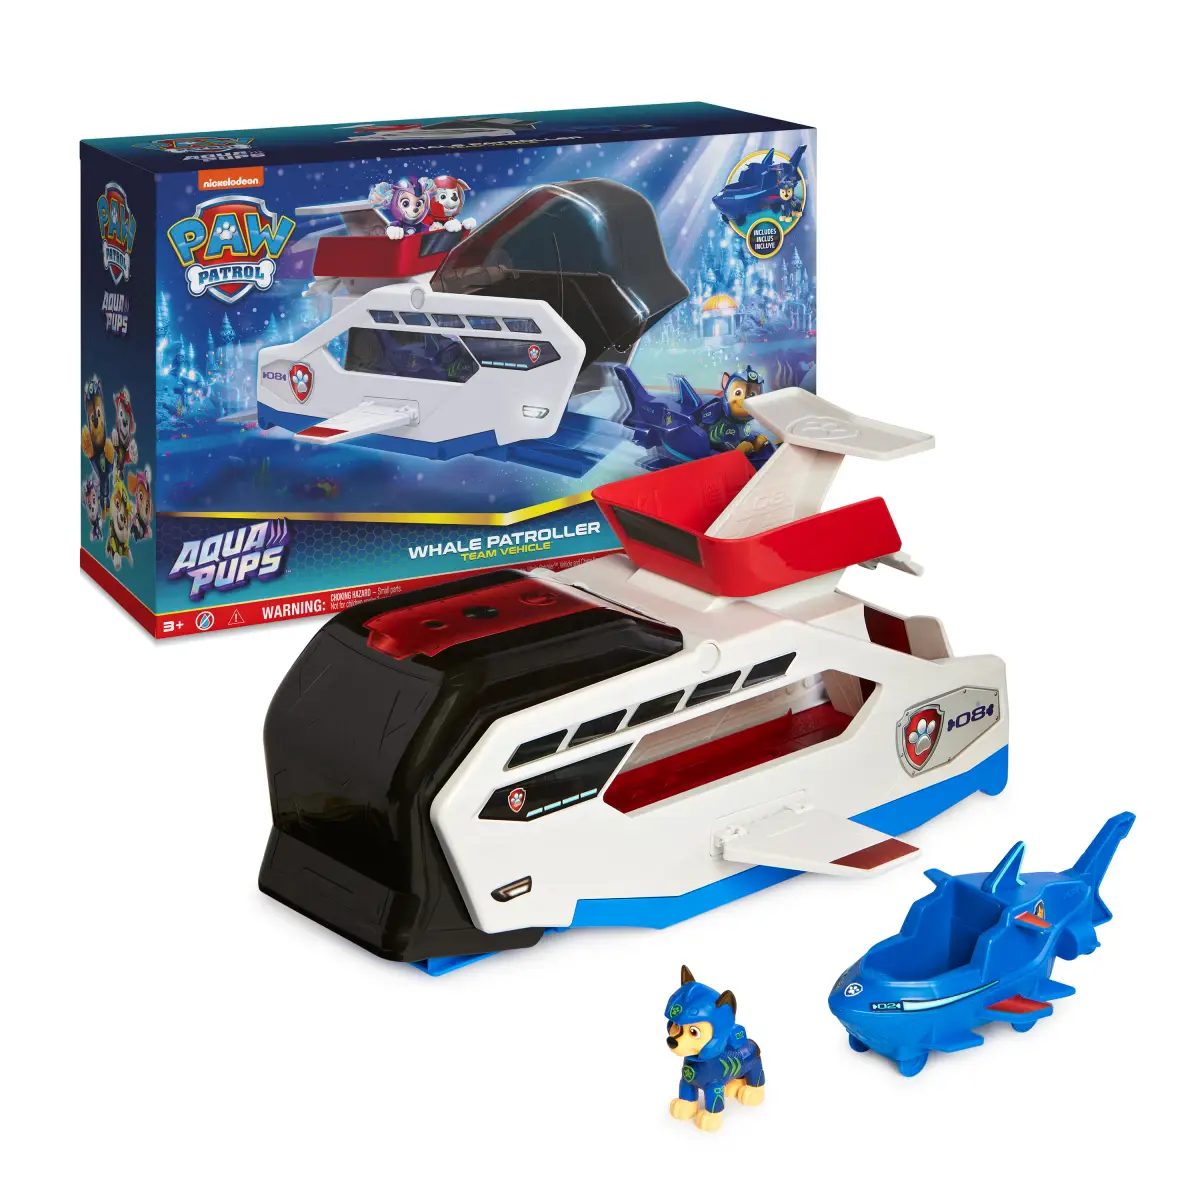 PAW Patrol Vehicle with Collectible Figure, for Kids Aged 3 Years and Over  Style